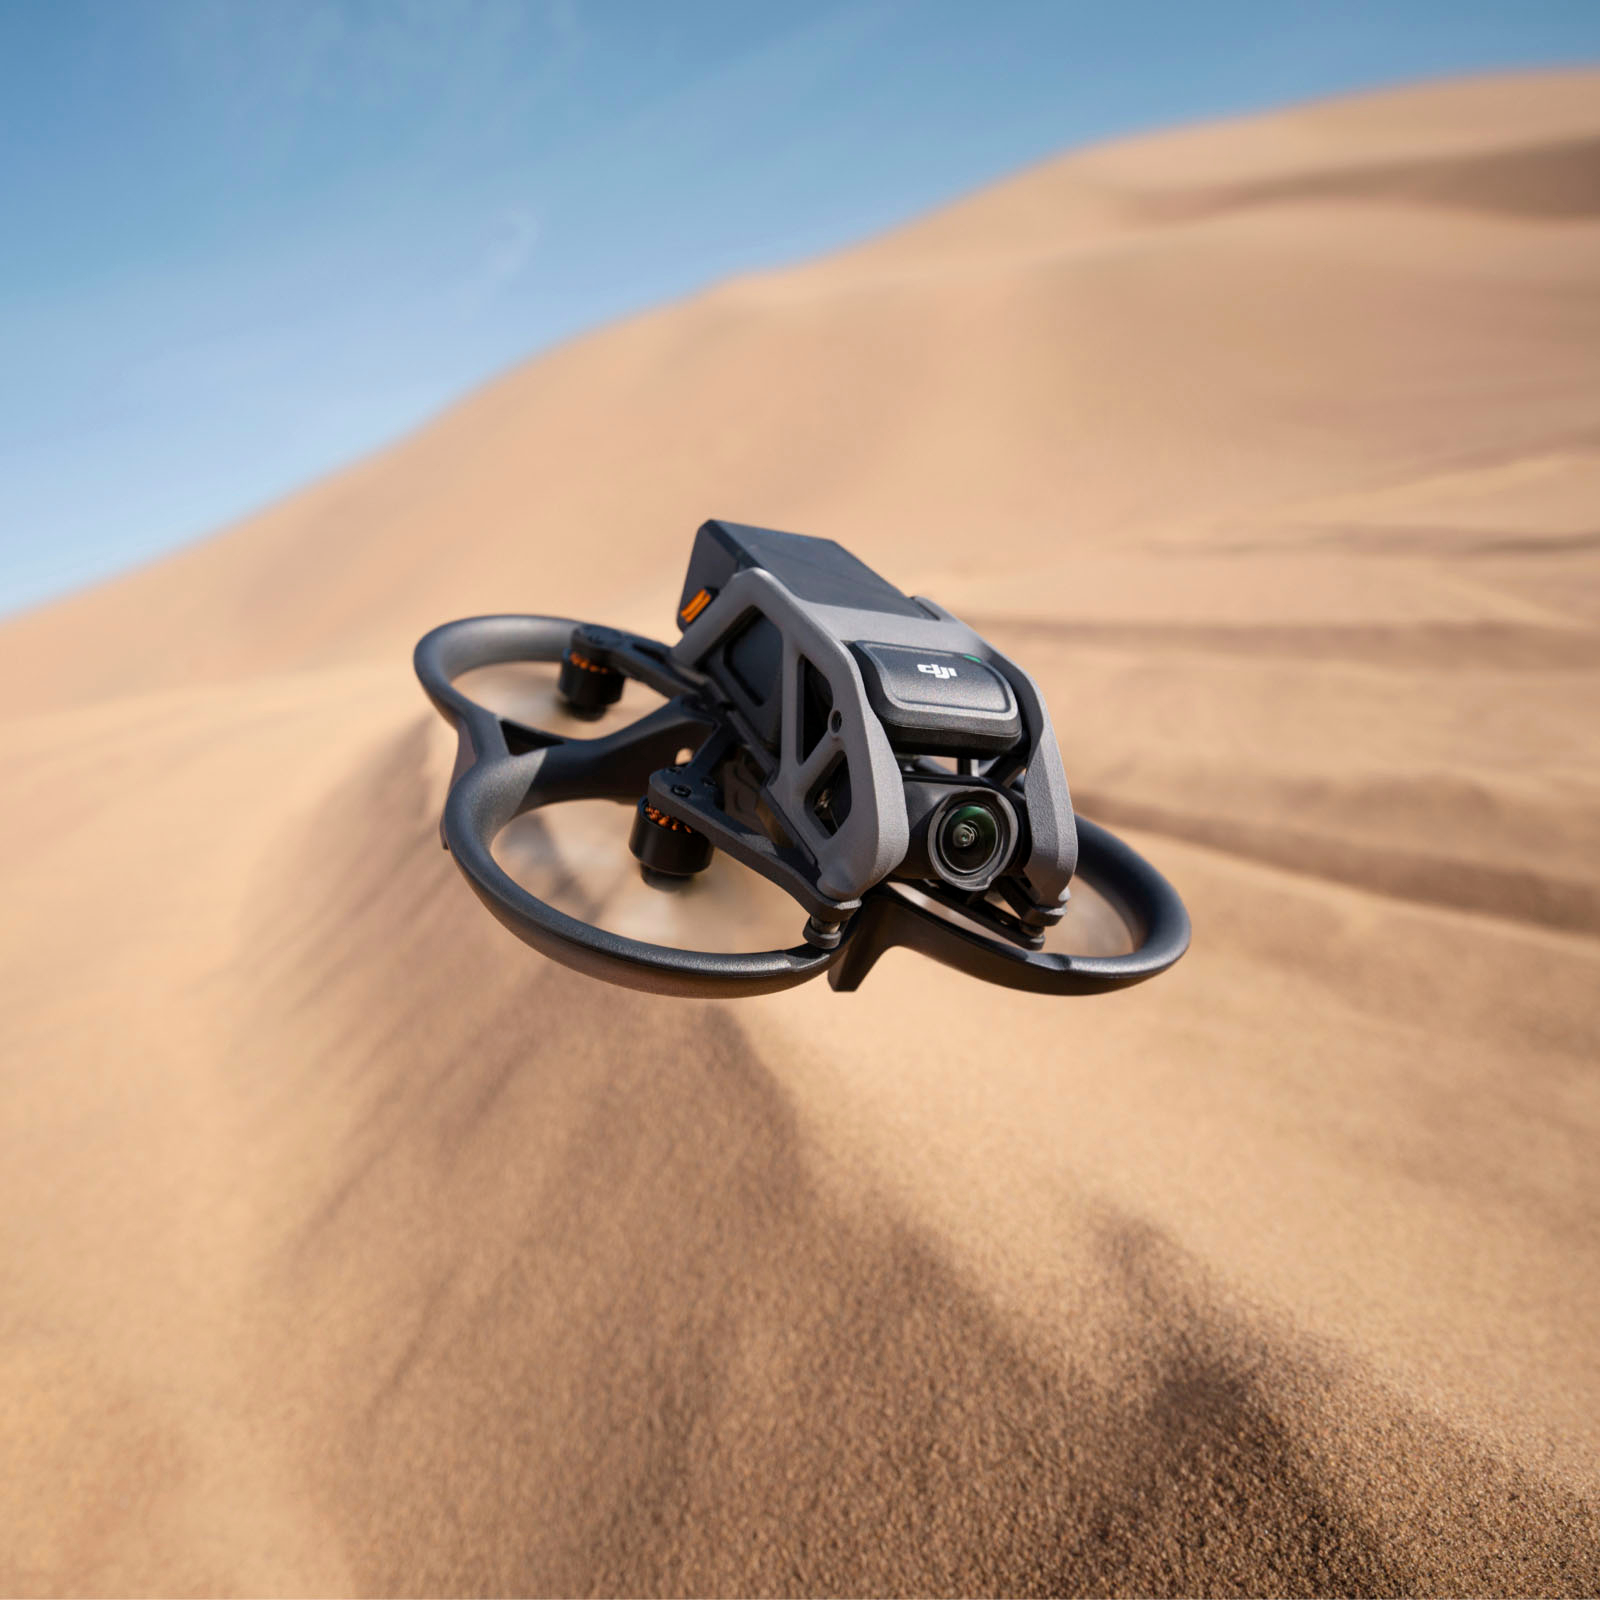 The DJI Avata is a fun hybrid camera-racing drone - Android Authority